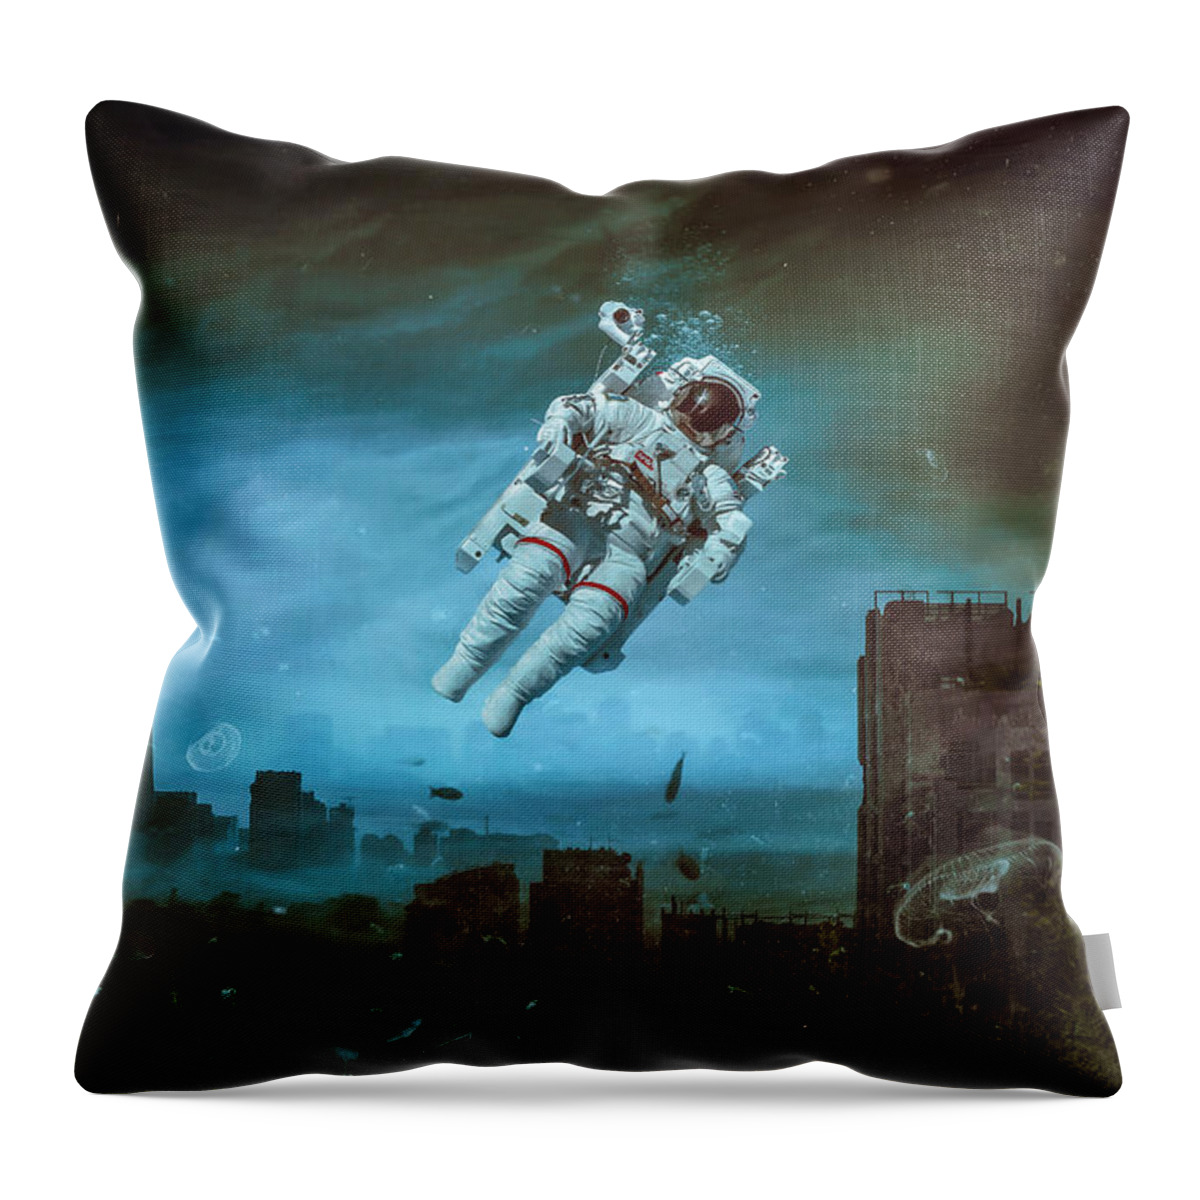 Surreal Throw Pillow featuring the digital art Sometimes by Mario Sanchez Nevado